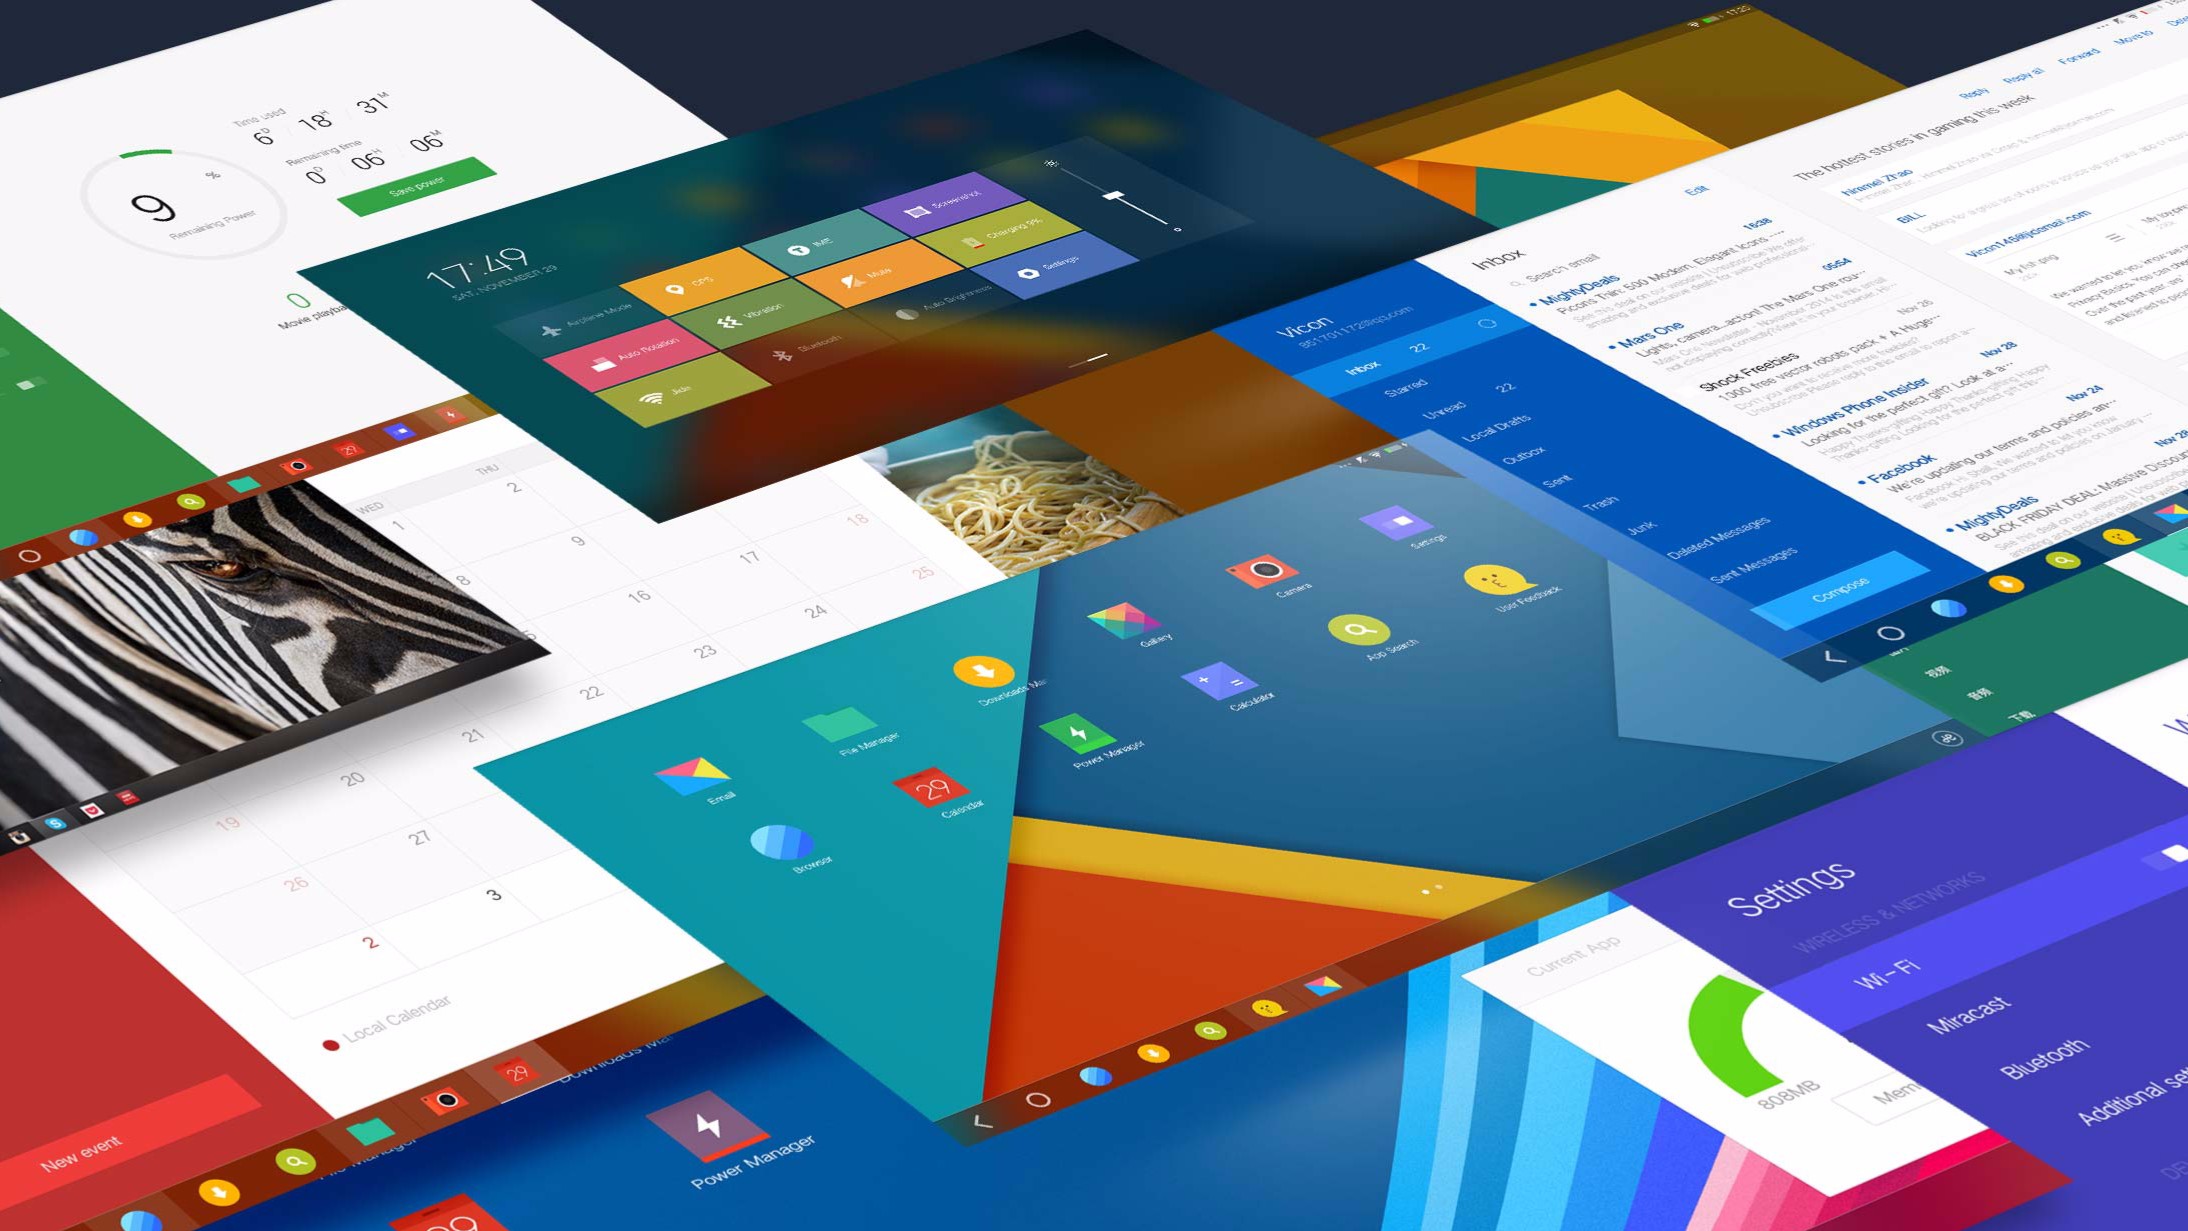 Jide Android Remix OS Ultra surface tablet